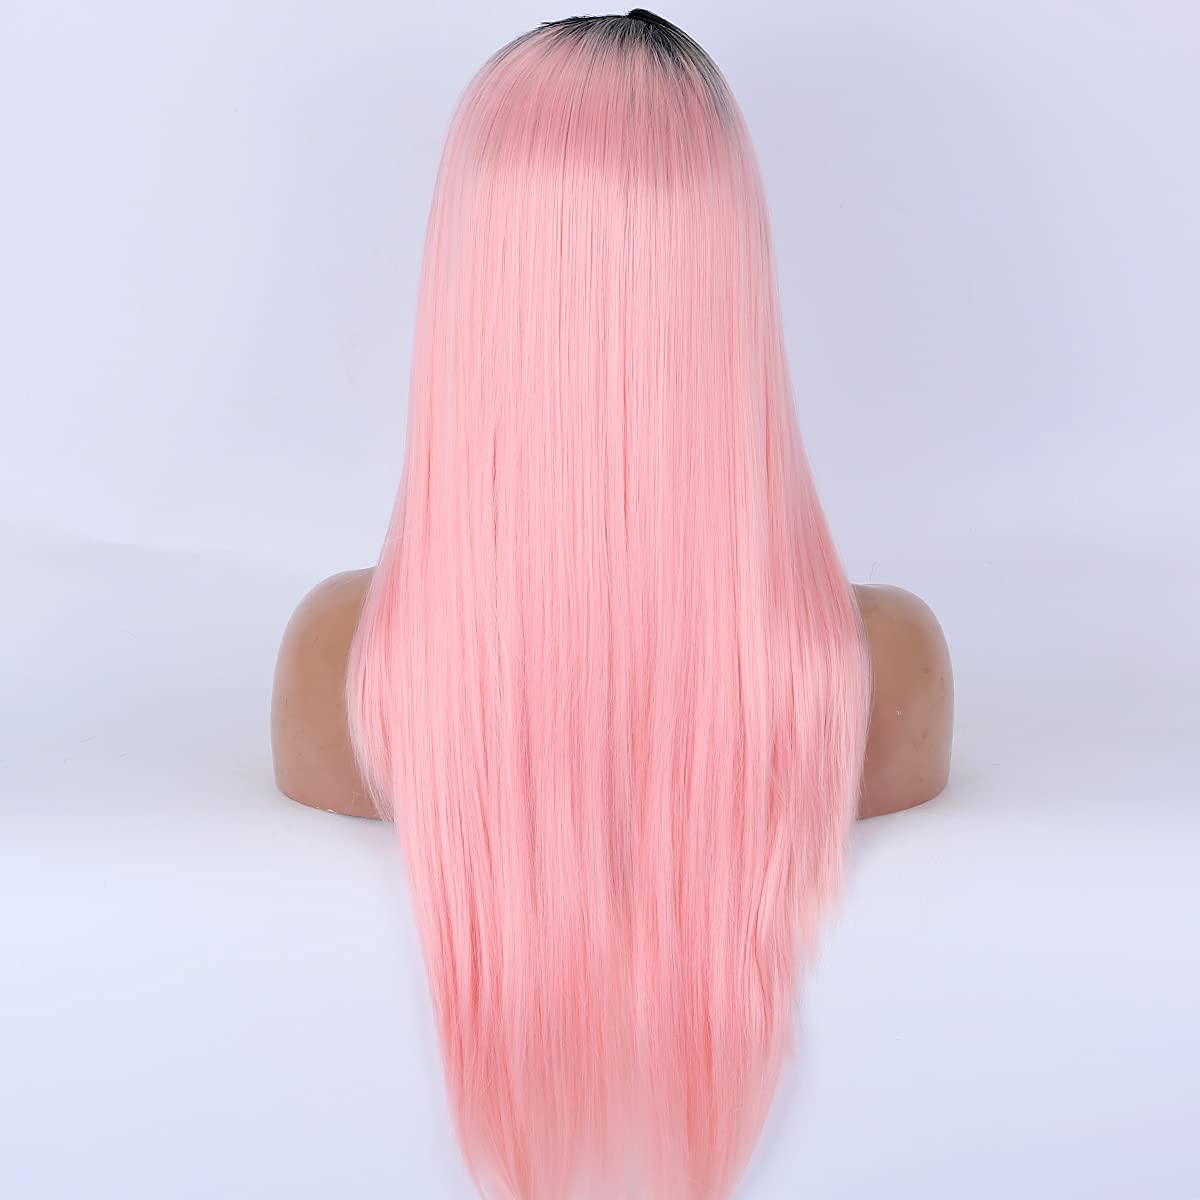 pink roots black hair wig,pink roots black hair wig black girl,pink and black hair black wig,Pink hair black,Pink root black hair wig,Black and pink hair black wig,pink hair lace front wig,pink roots on black wig,pink wig black girl brown roots,13×4 Long light Pink Straight Wig,Ombre Pink Lace Front Wig,pink black hair,ombre hair color for black hair,ombre pink hair,pink wig,wigs,hot pink hair,pink hair inspiration,pink hair color,light pink hair,rose gold hair,rose gold hair blonde